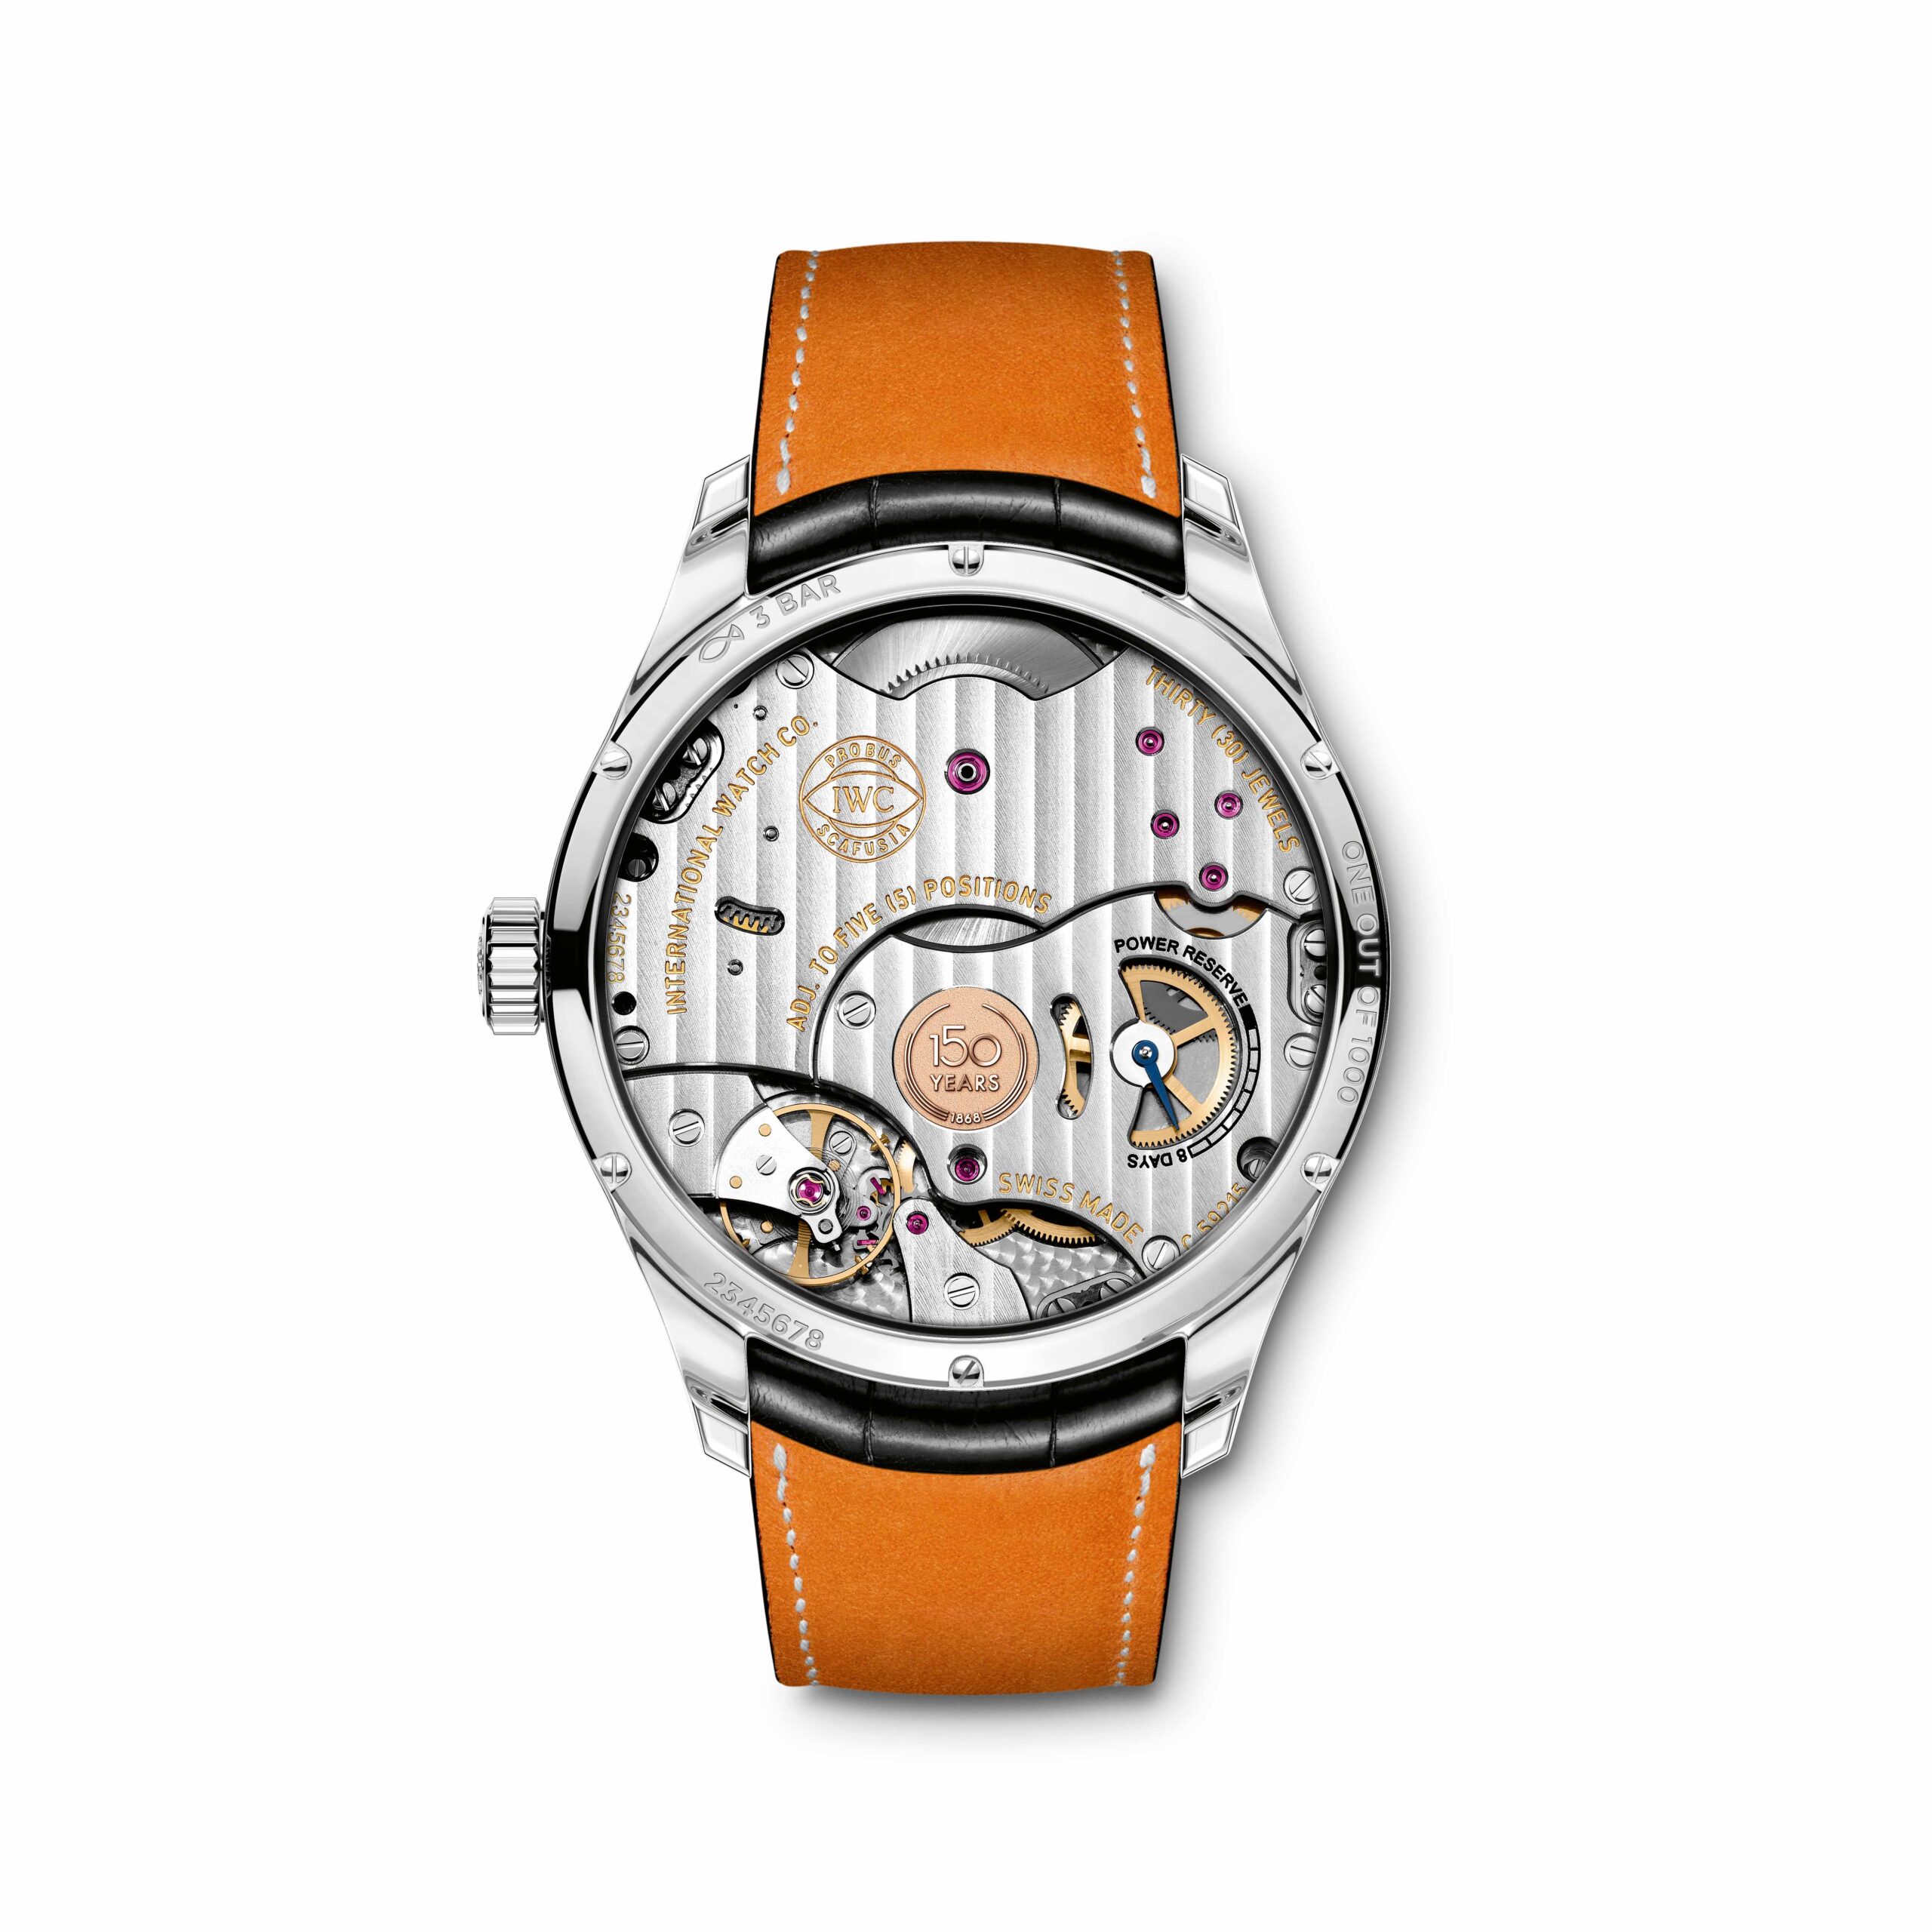 The IWC-manufactured hand-wound 59215 calibre offers an 8-day power reserve. The power reserve display is on the back of the movement and visible via a glass back cover.